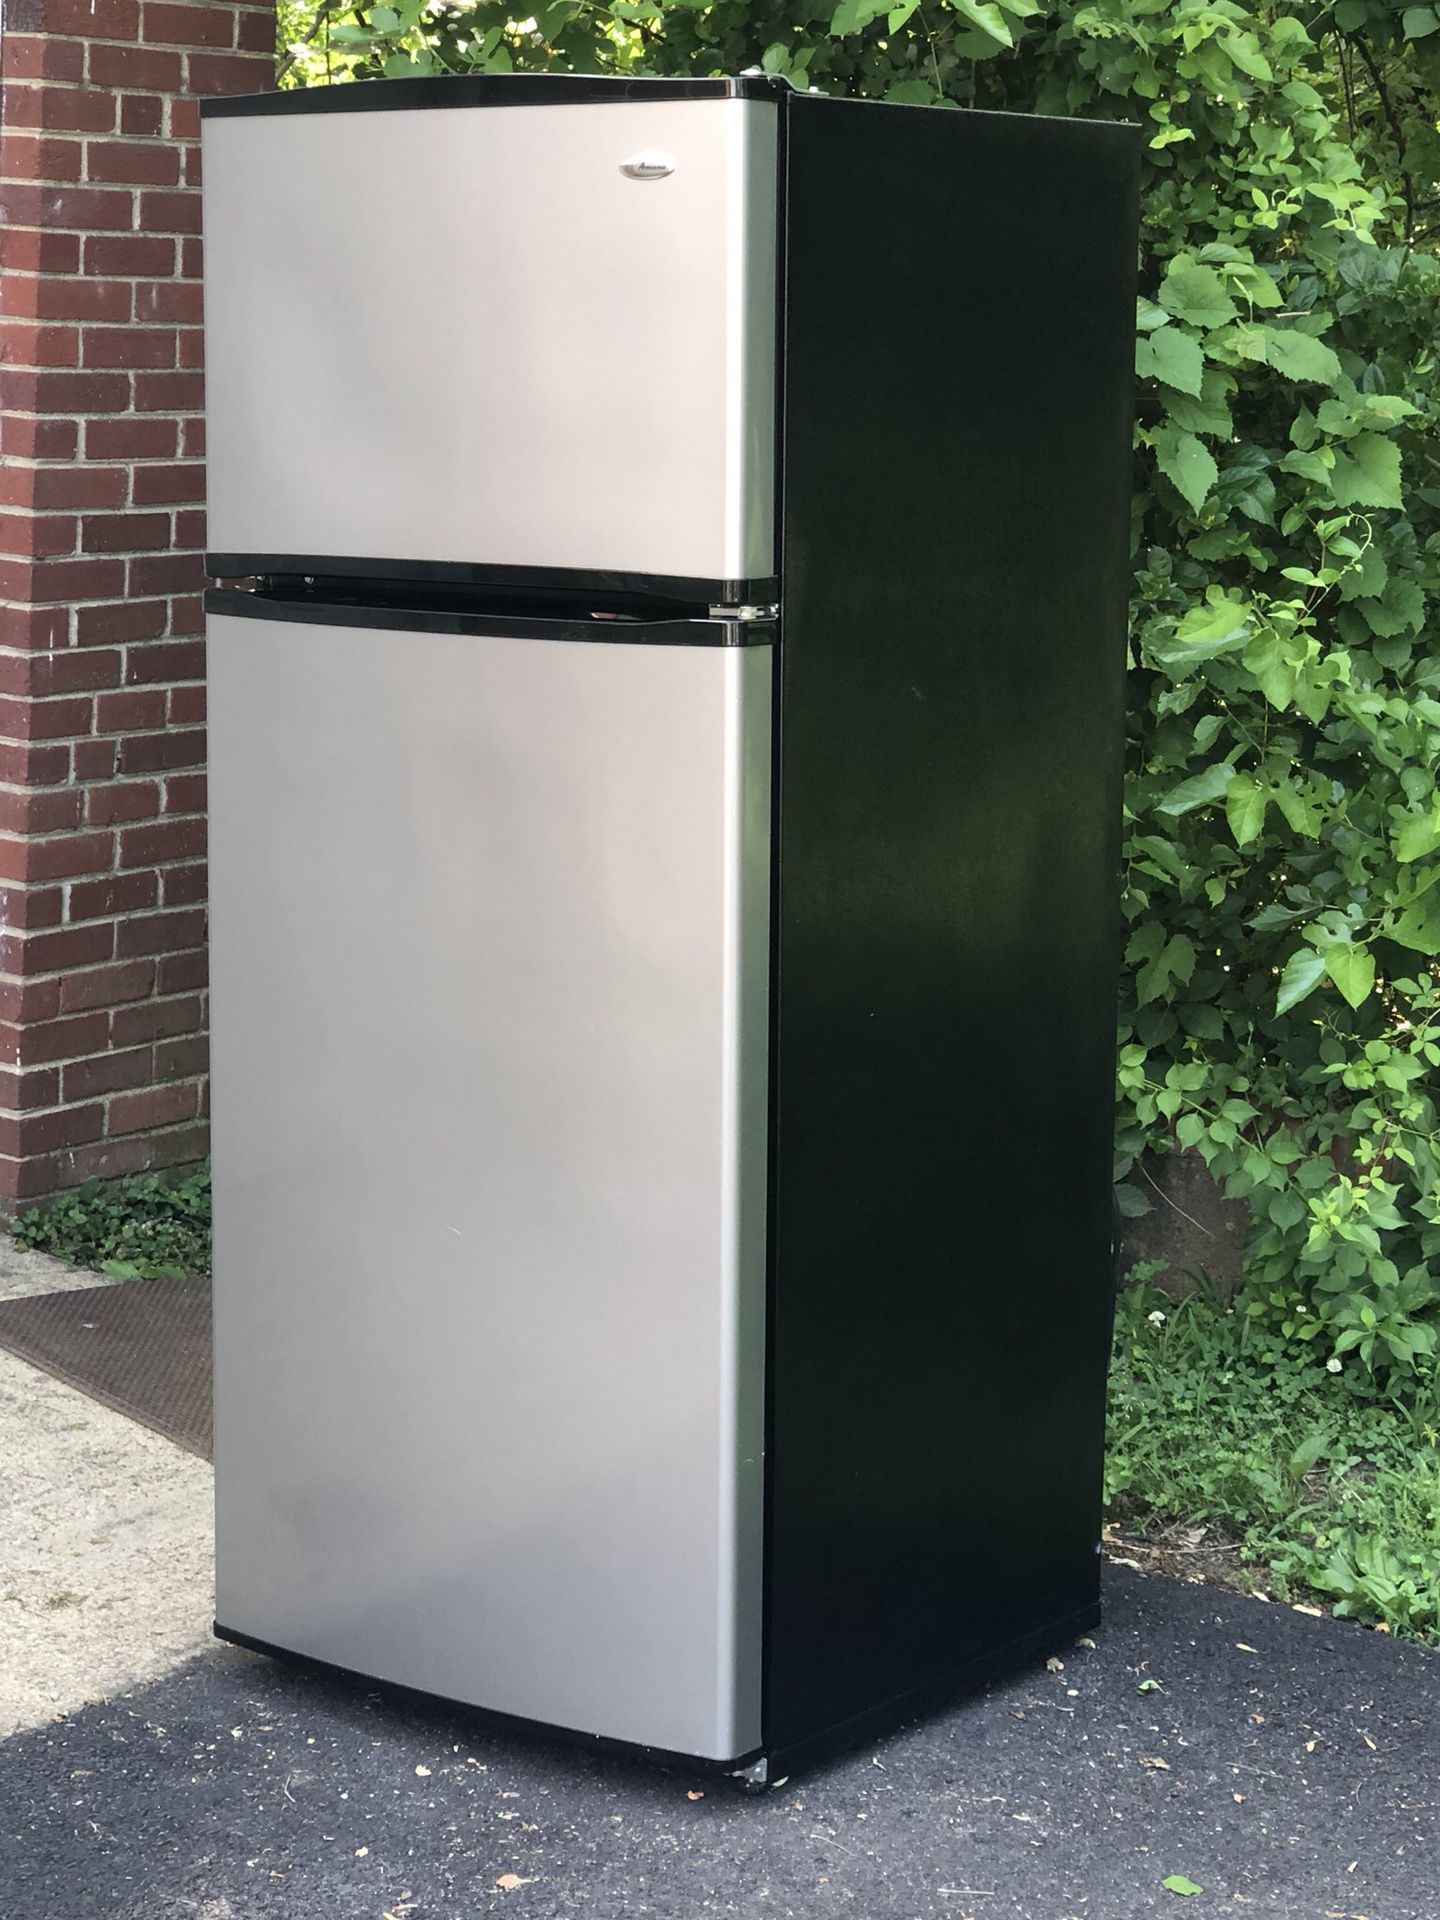 Amana silver refrigerator! Very clean $275 firm